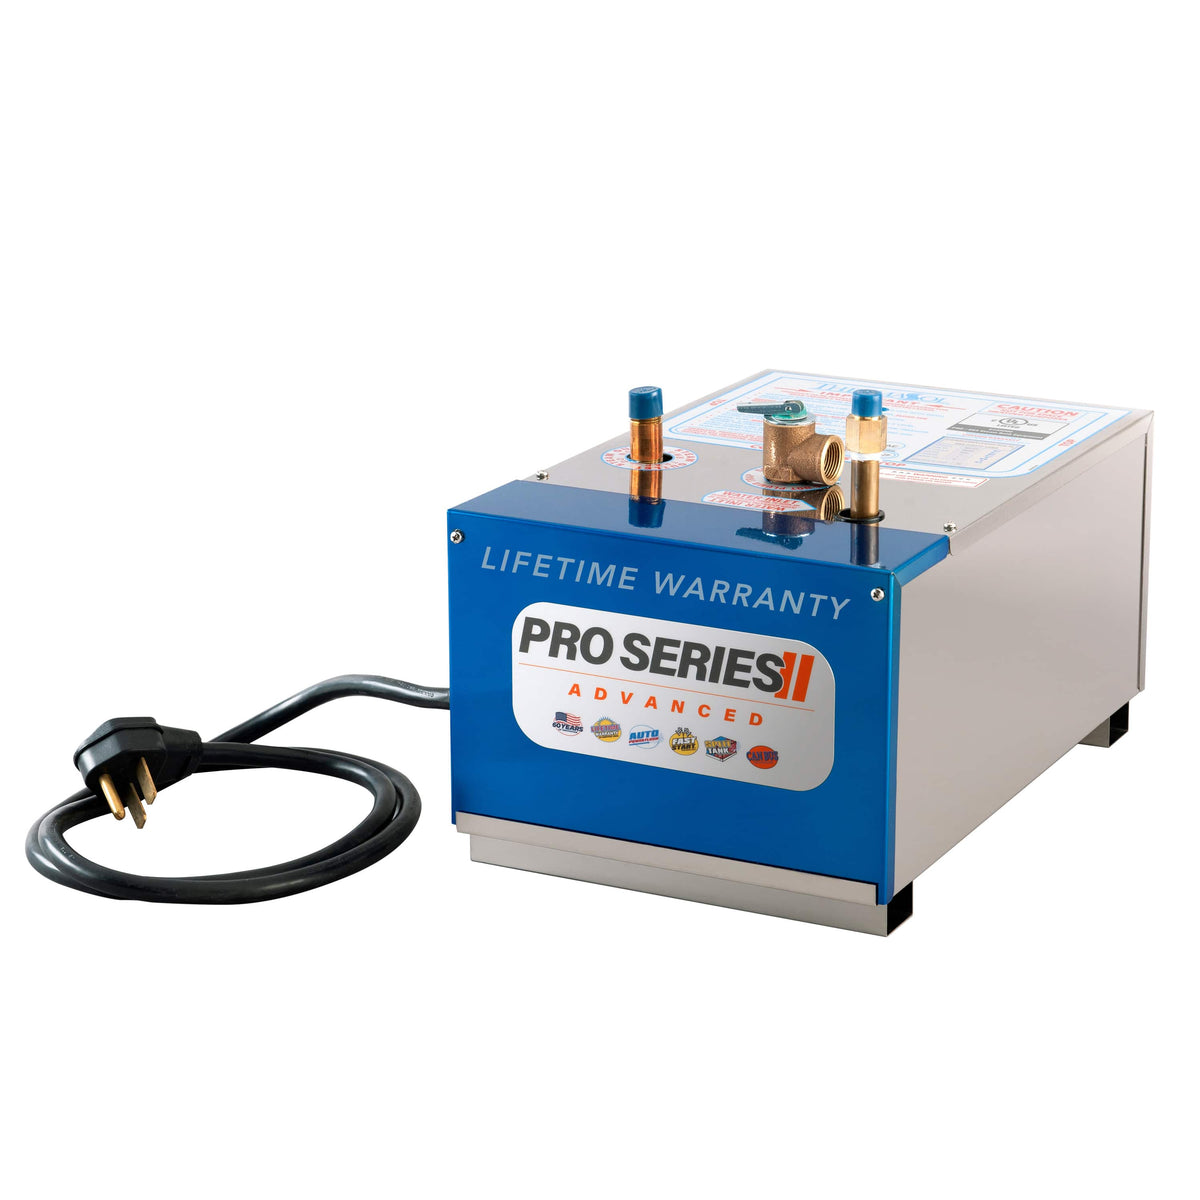 ThermaSol PROII-140 Pro Series Advanced with Fast Start, and Powerflush - 140